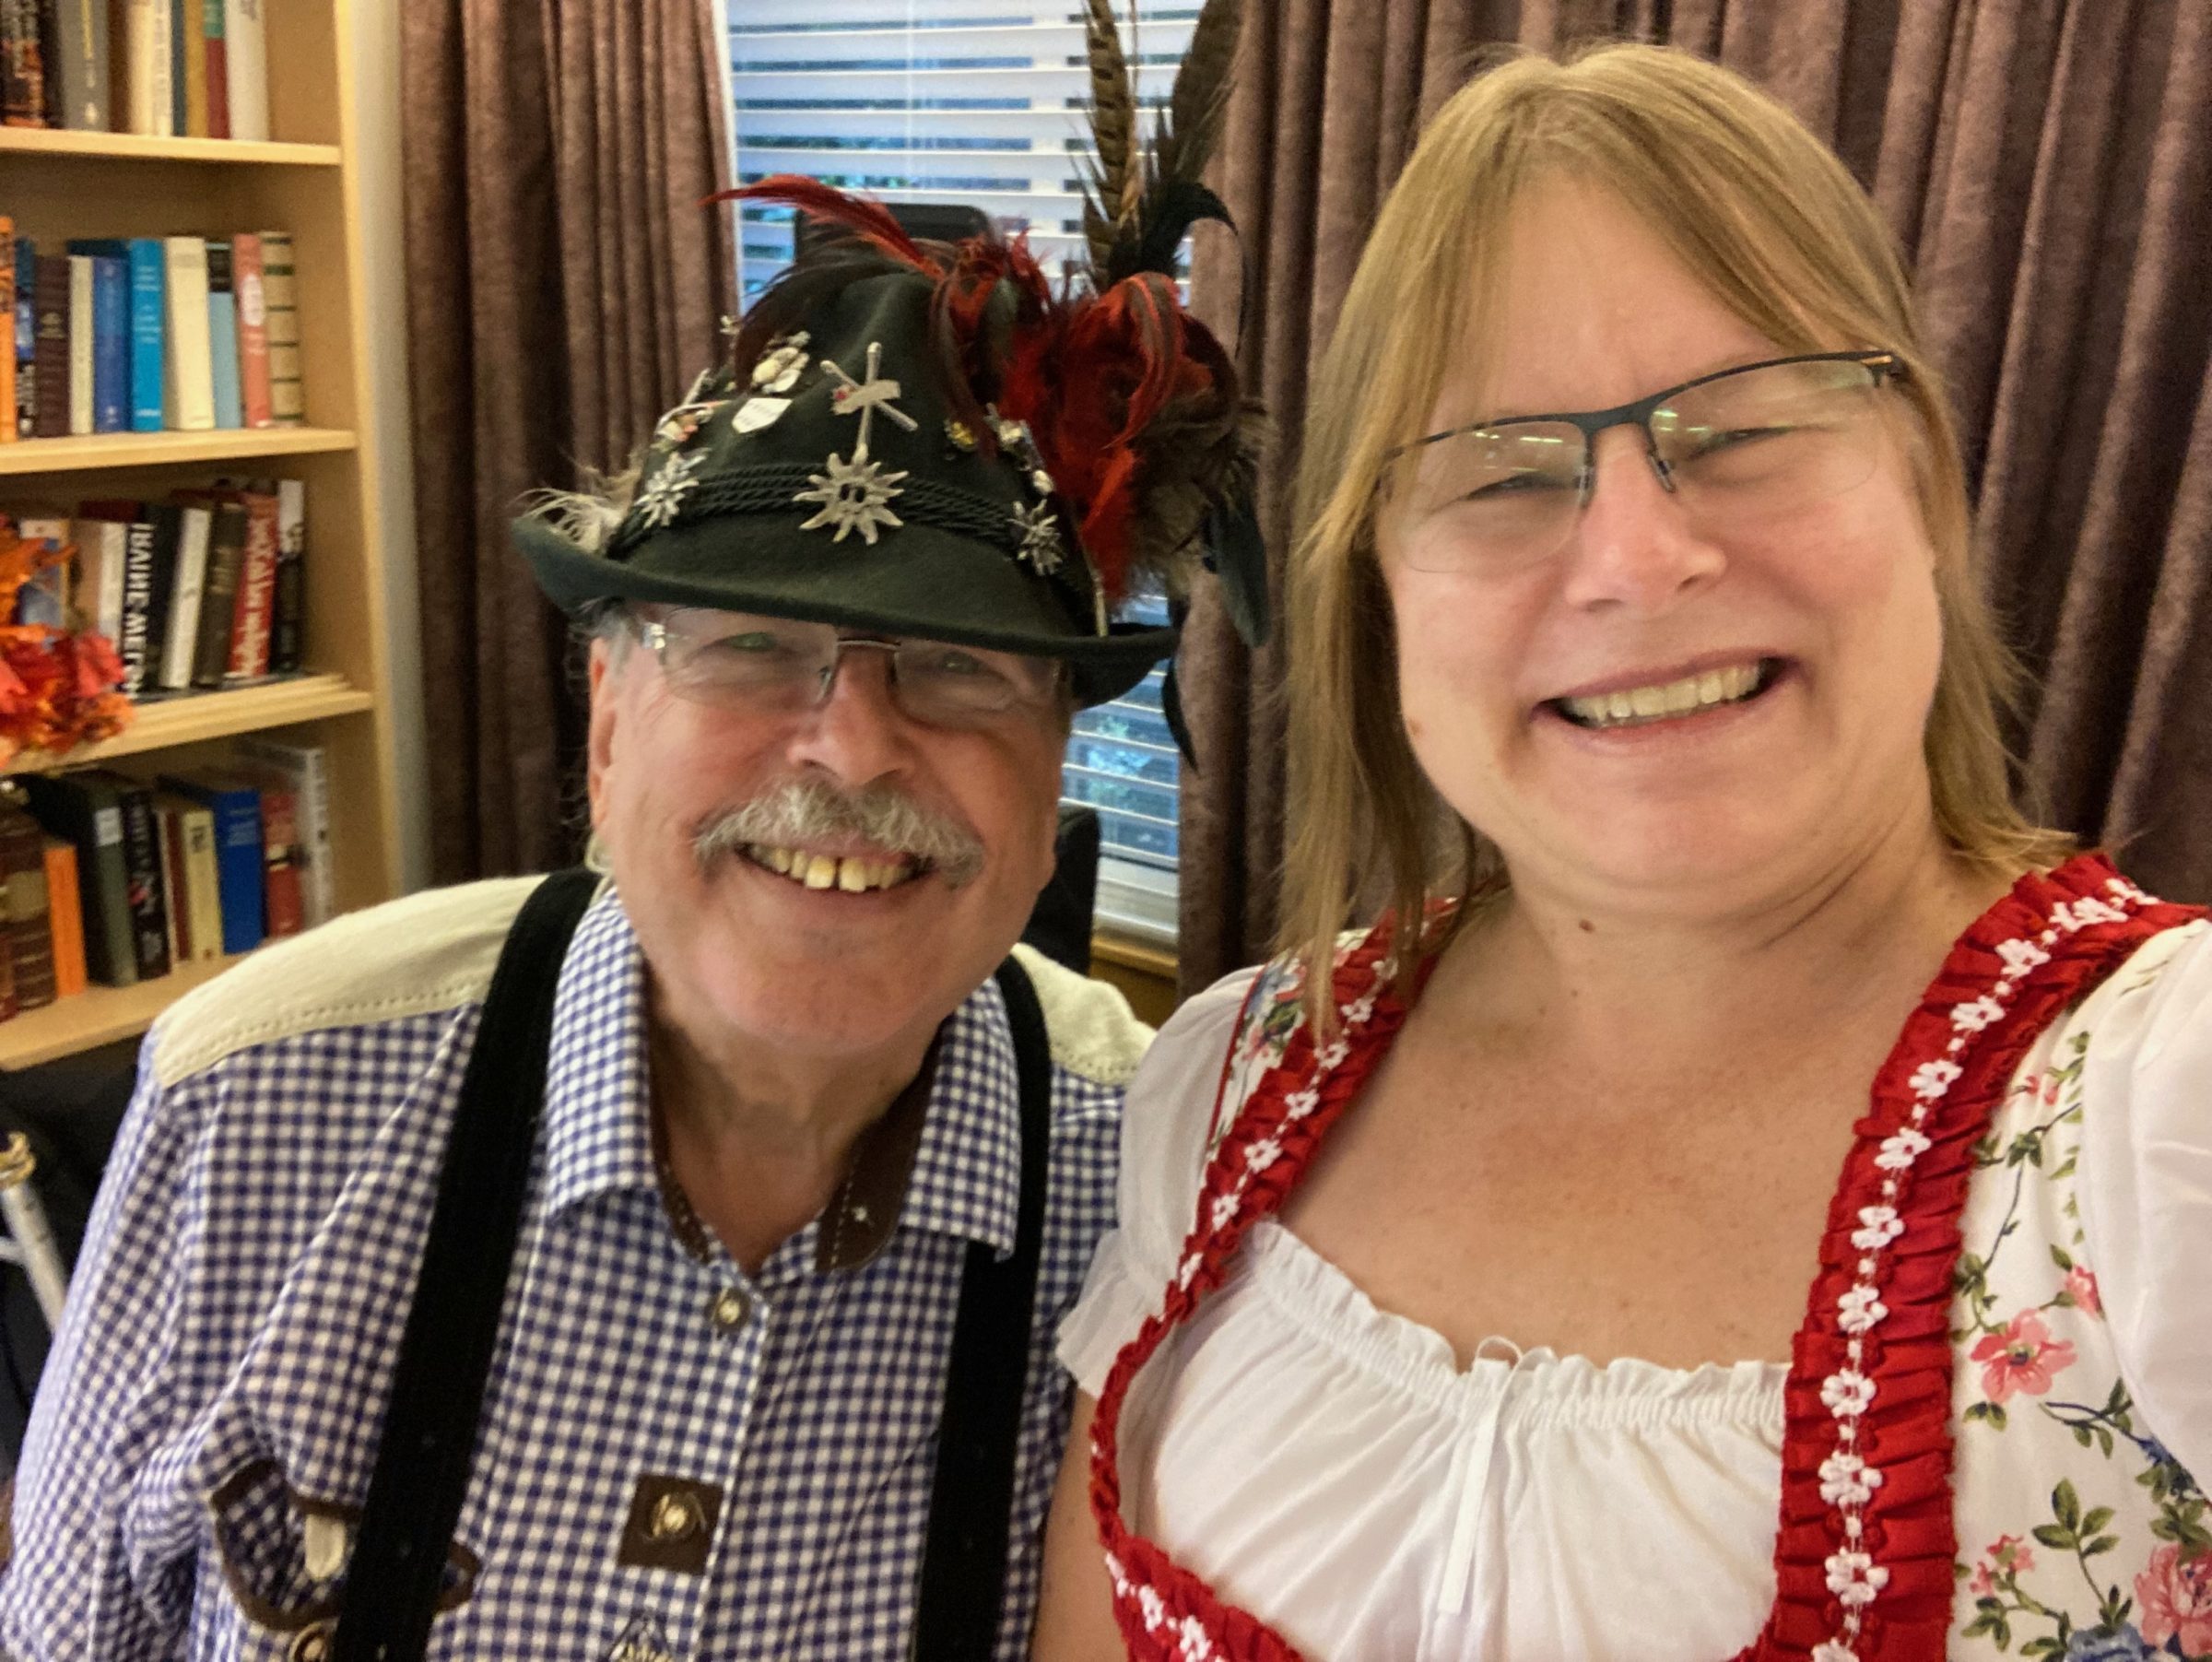 Events at the German Canadian Care Home